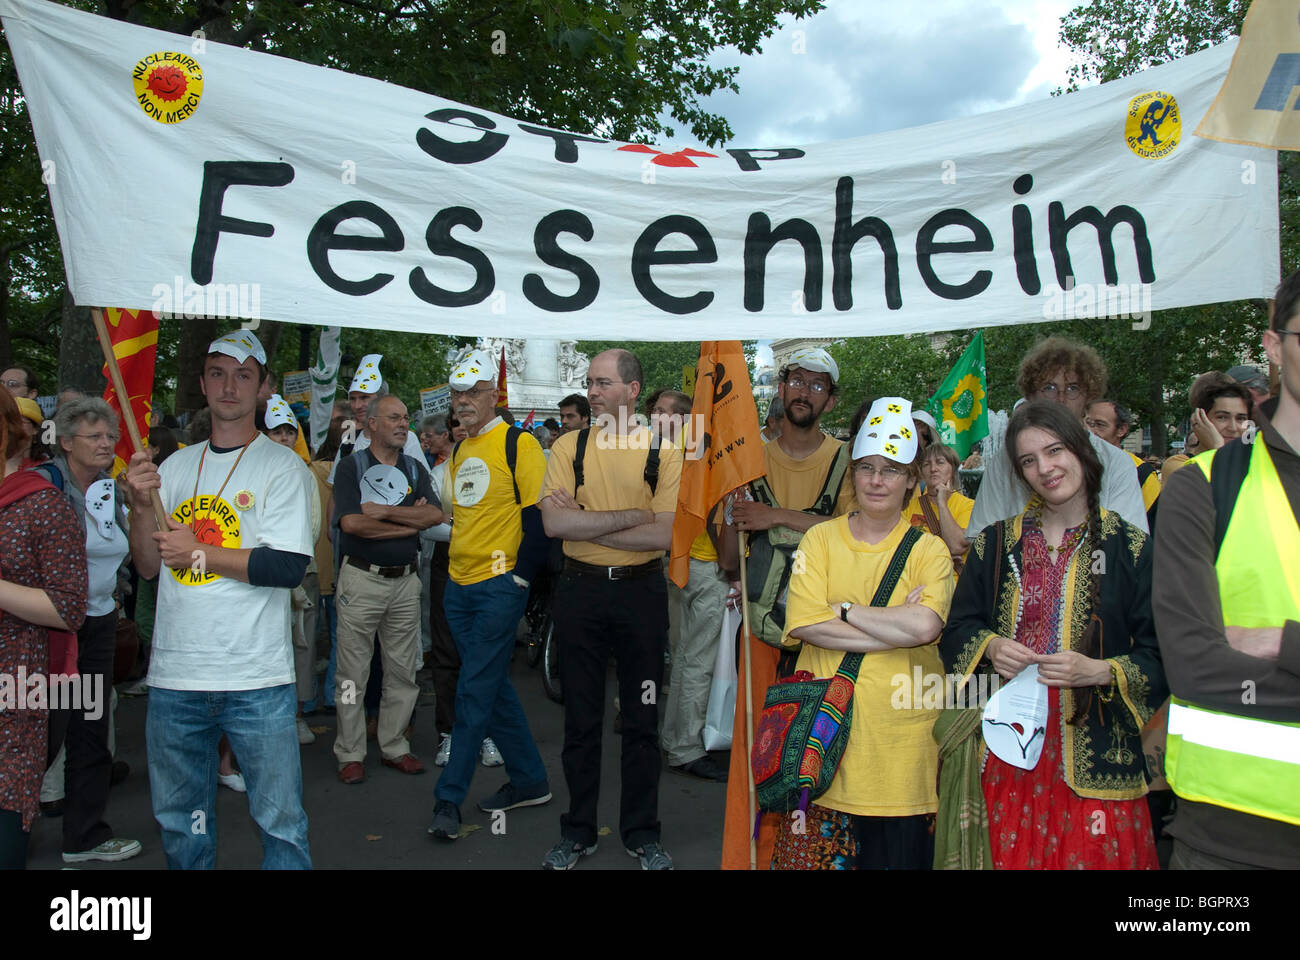 Paris, FRANCE - Anti-Nuclear Power Demonstration by Several Environmental N.G.O's. International, Activists Holding Protest Banner 'Stop Fessenheim' (Nuclear Power Station) Stock Photo